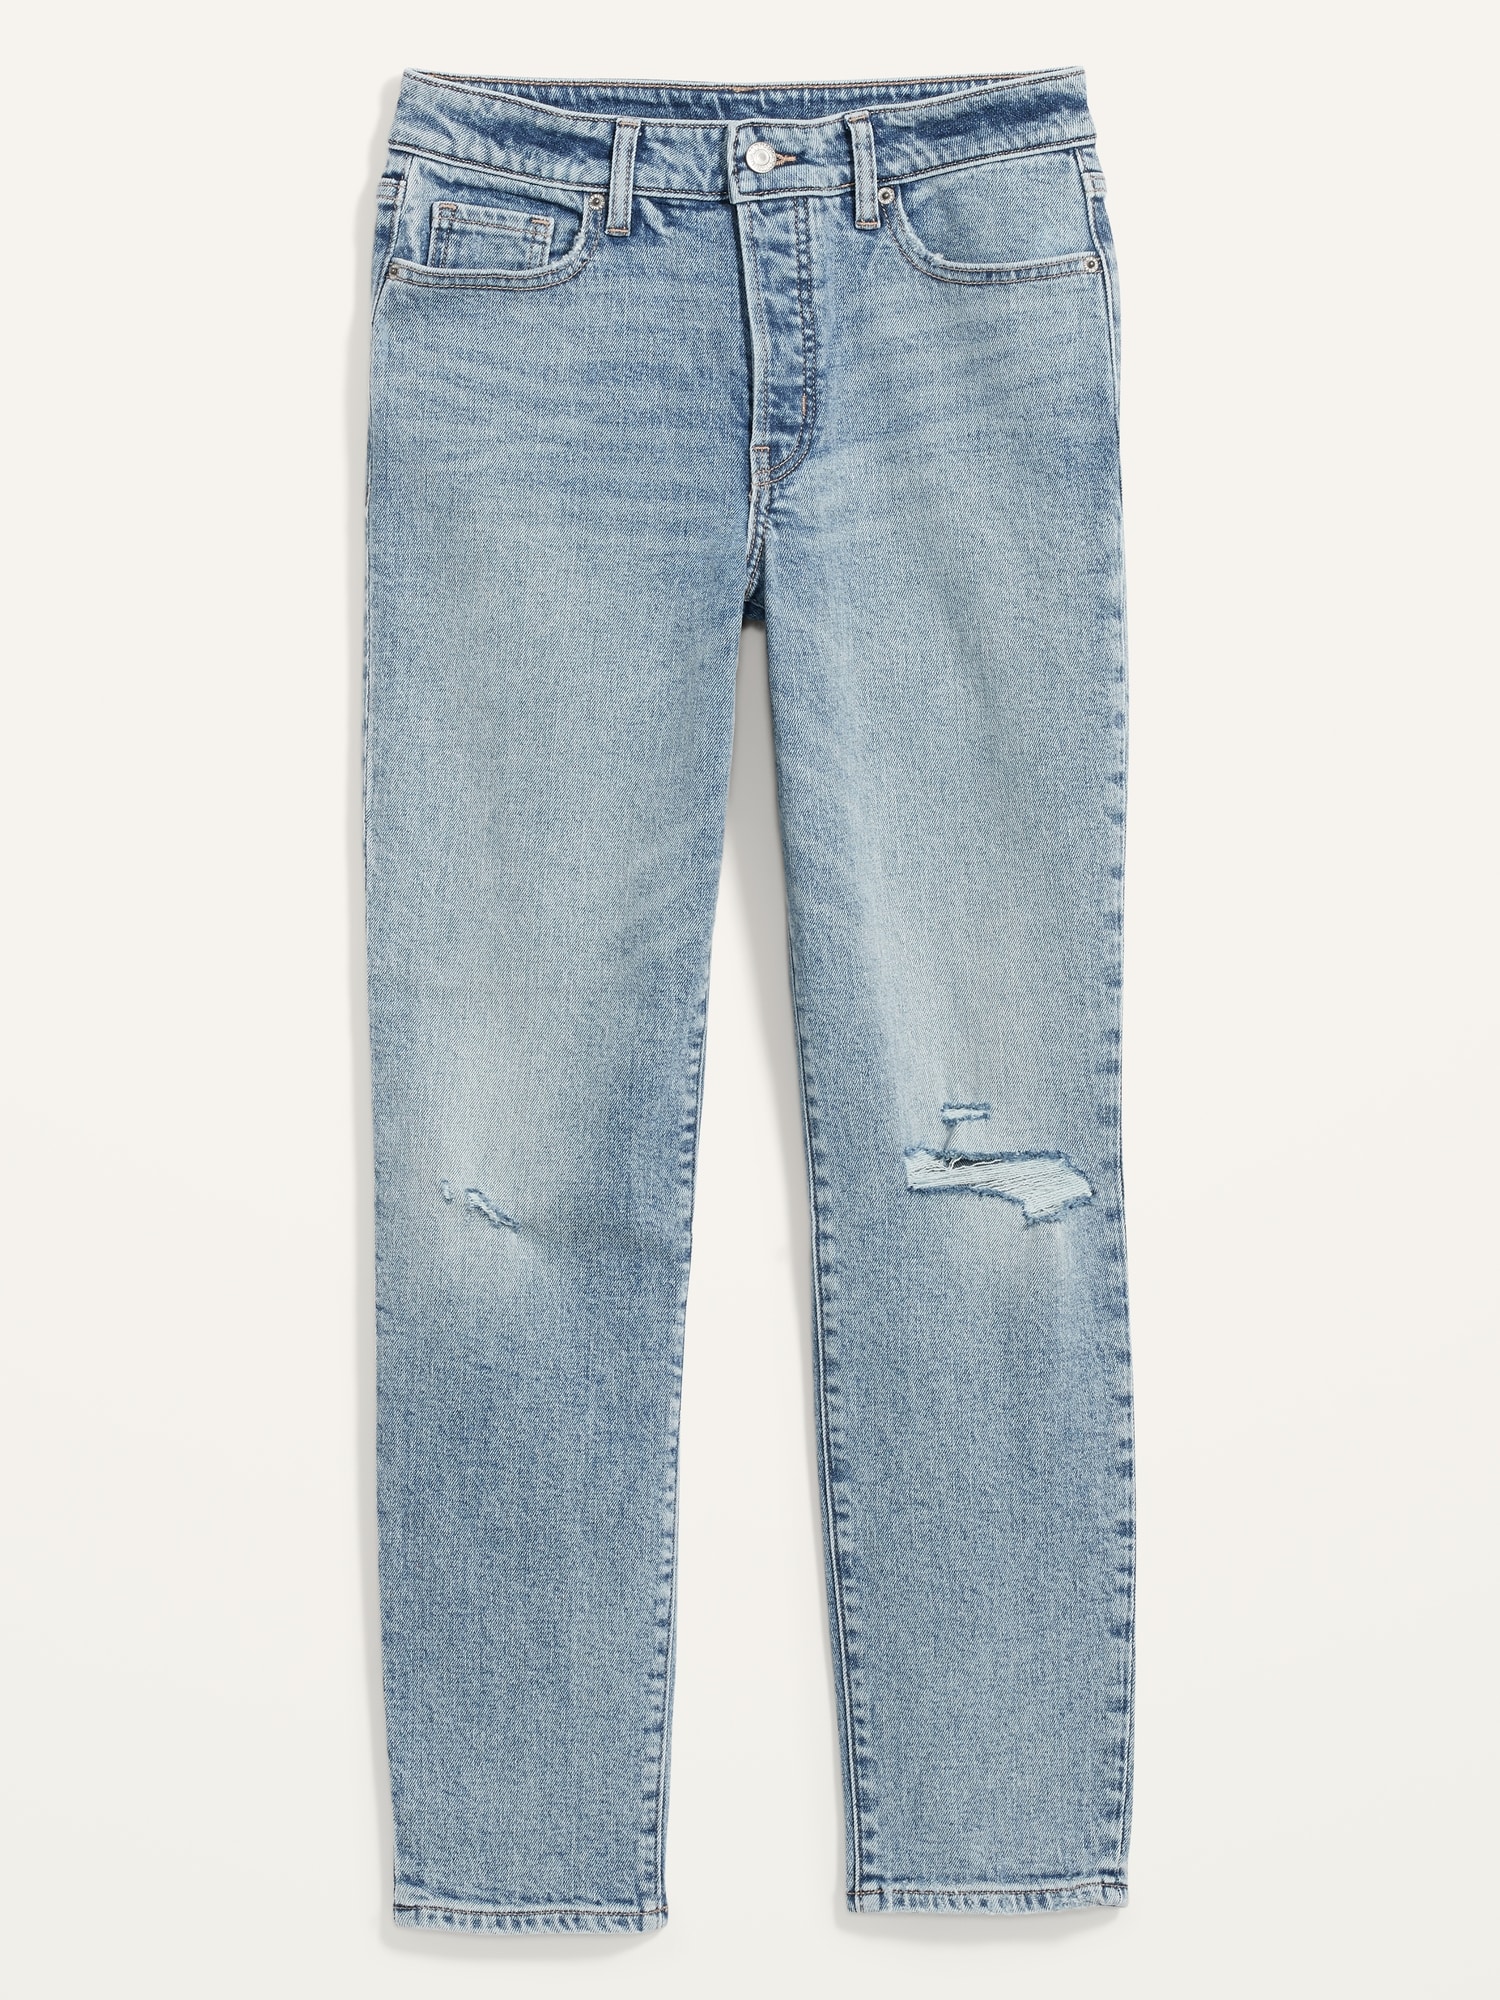 button fly jeans old navy